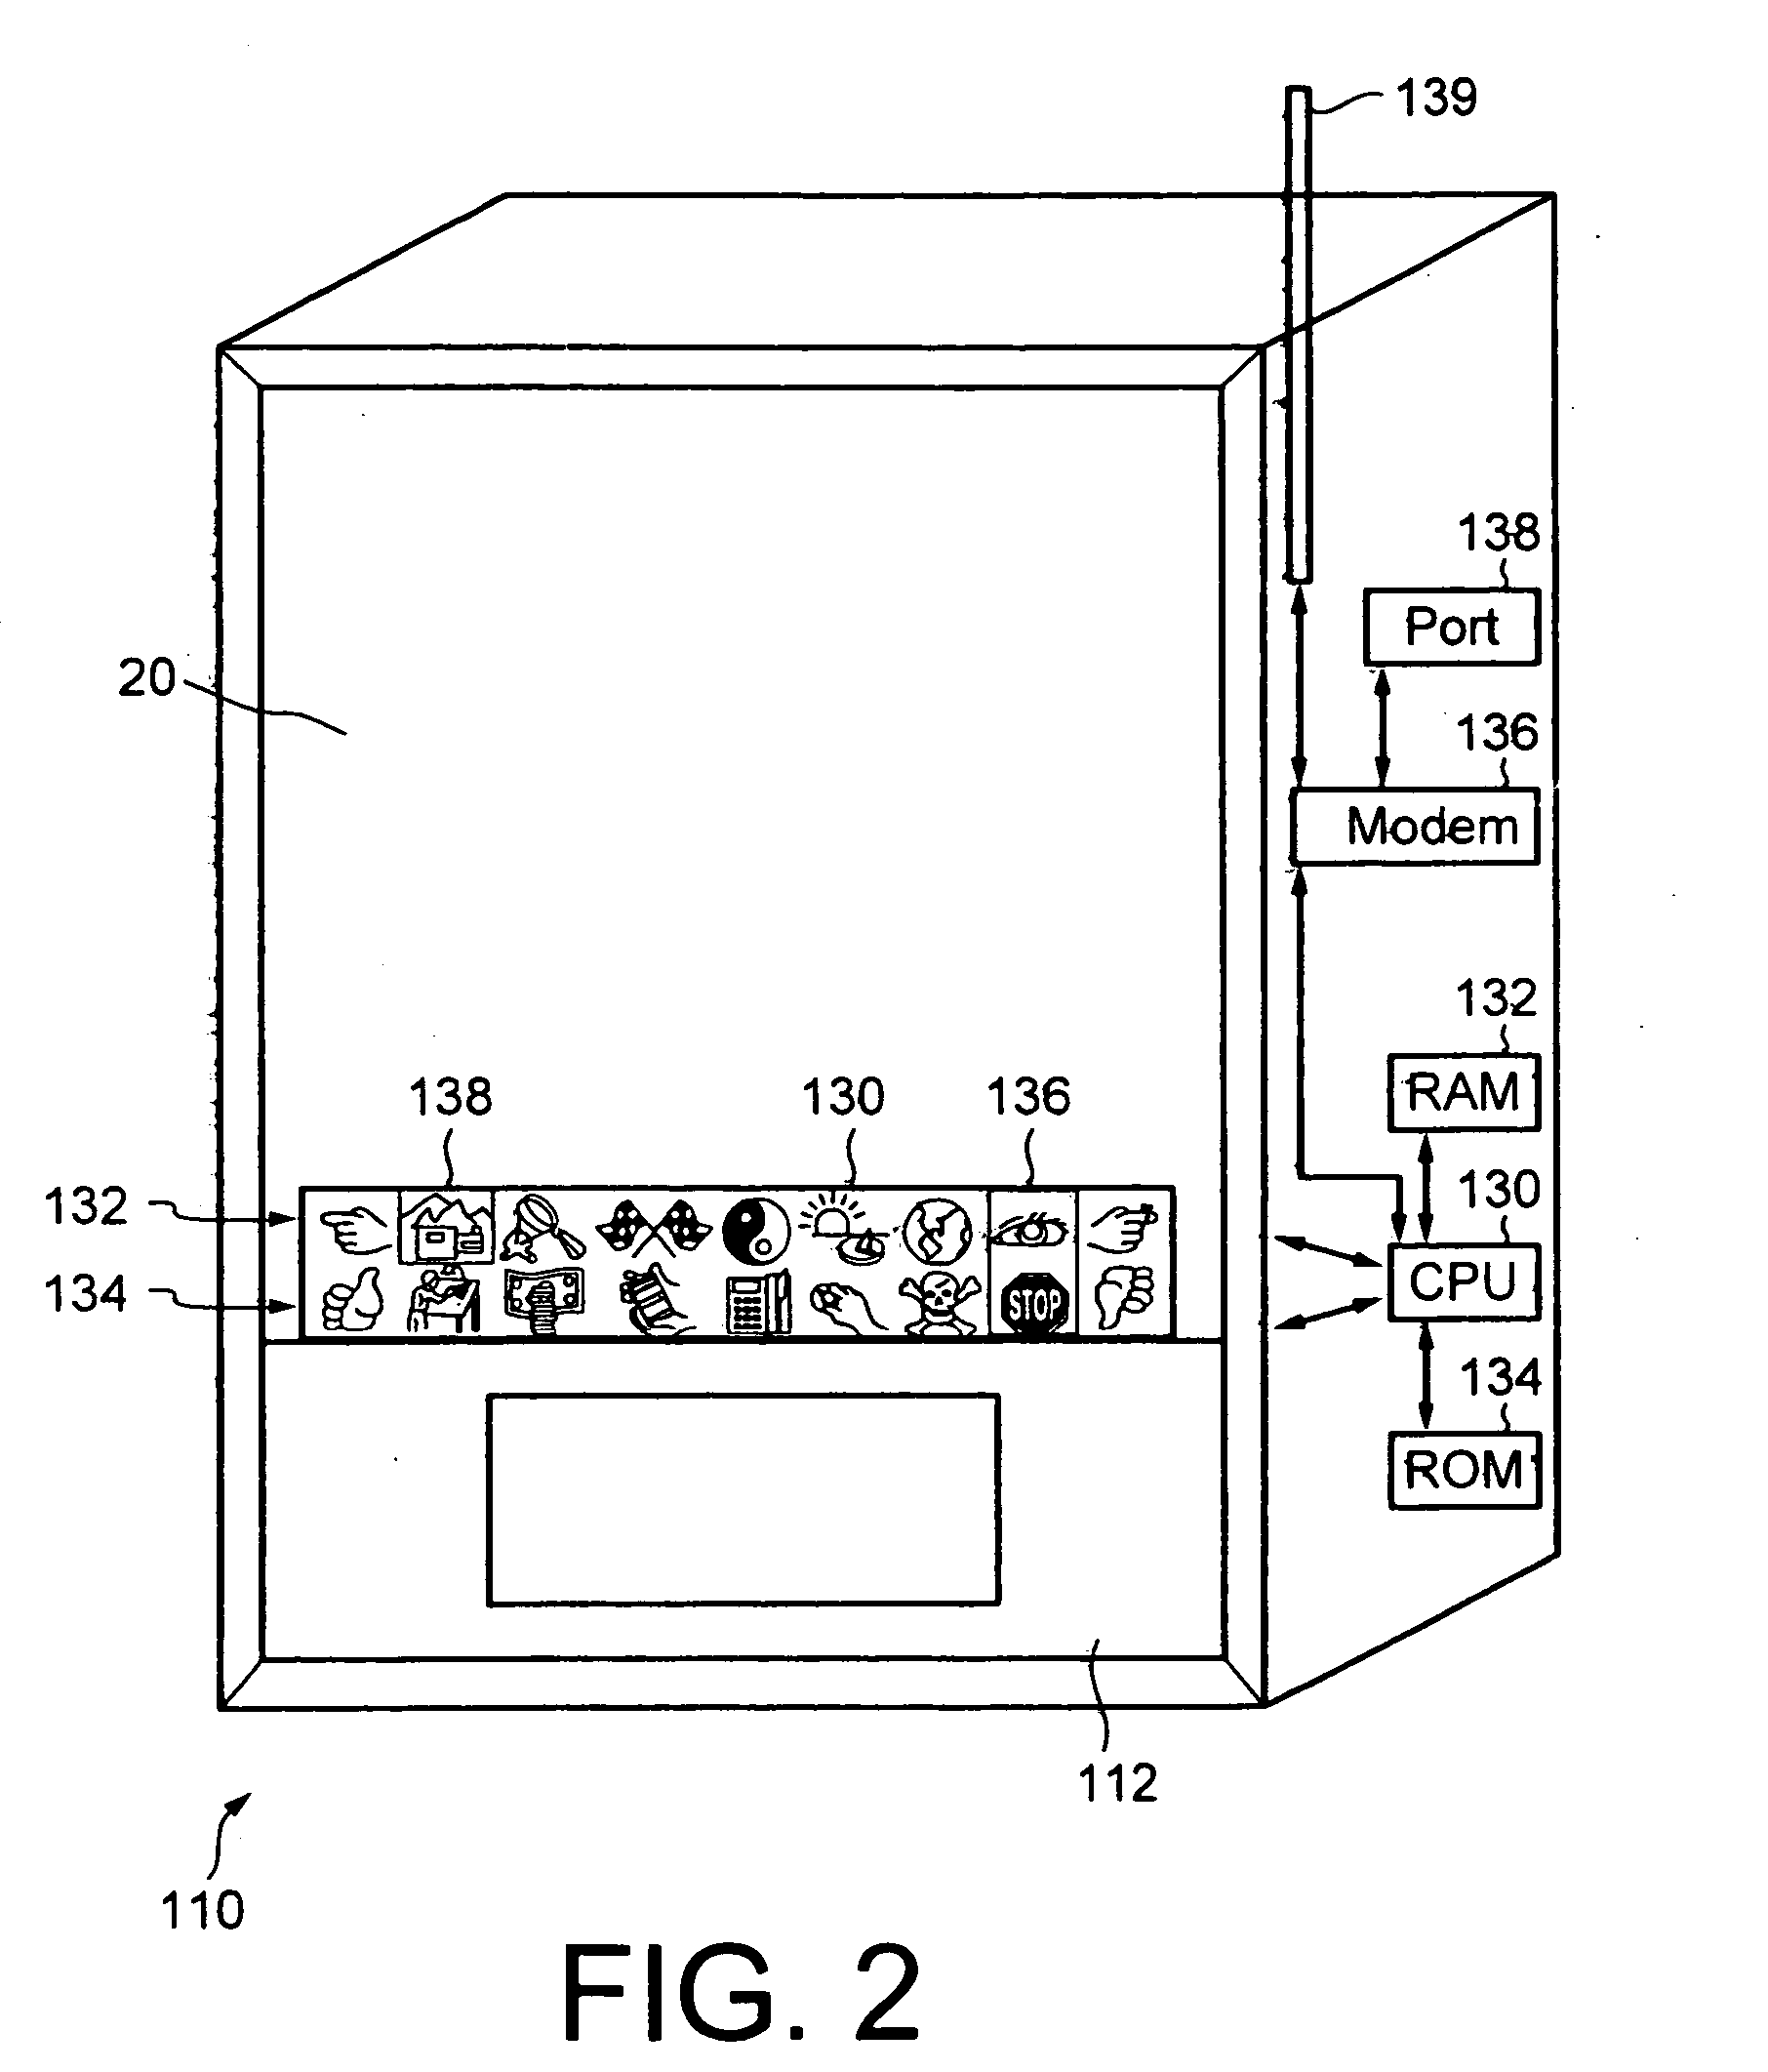 Computer device, method and article of manufacture for utilizing sequenced symbols to enable programmed applications and commands